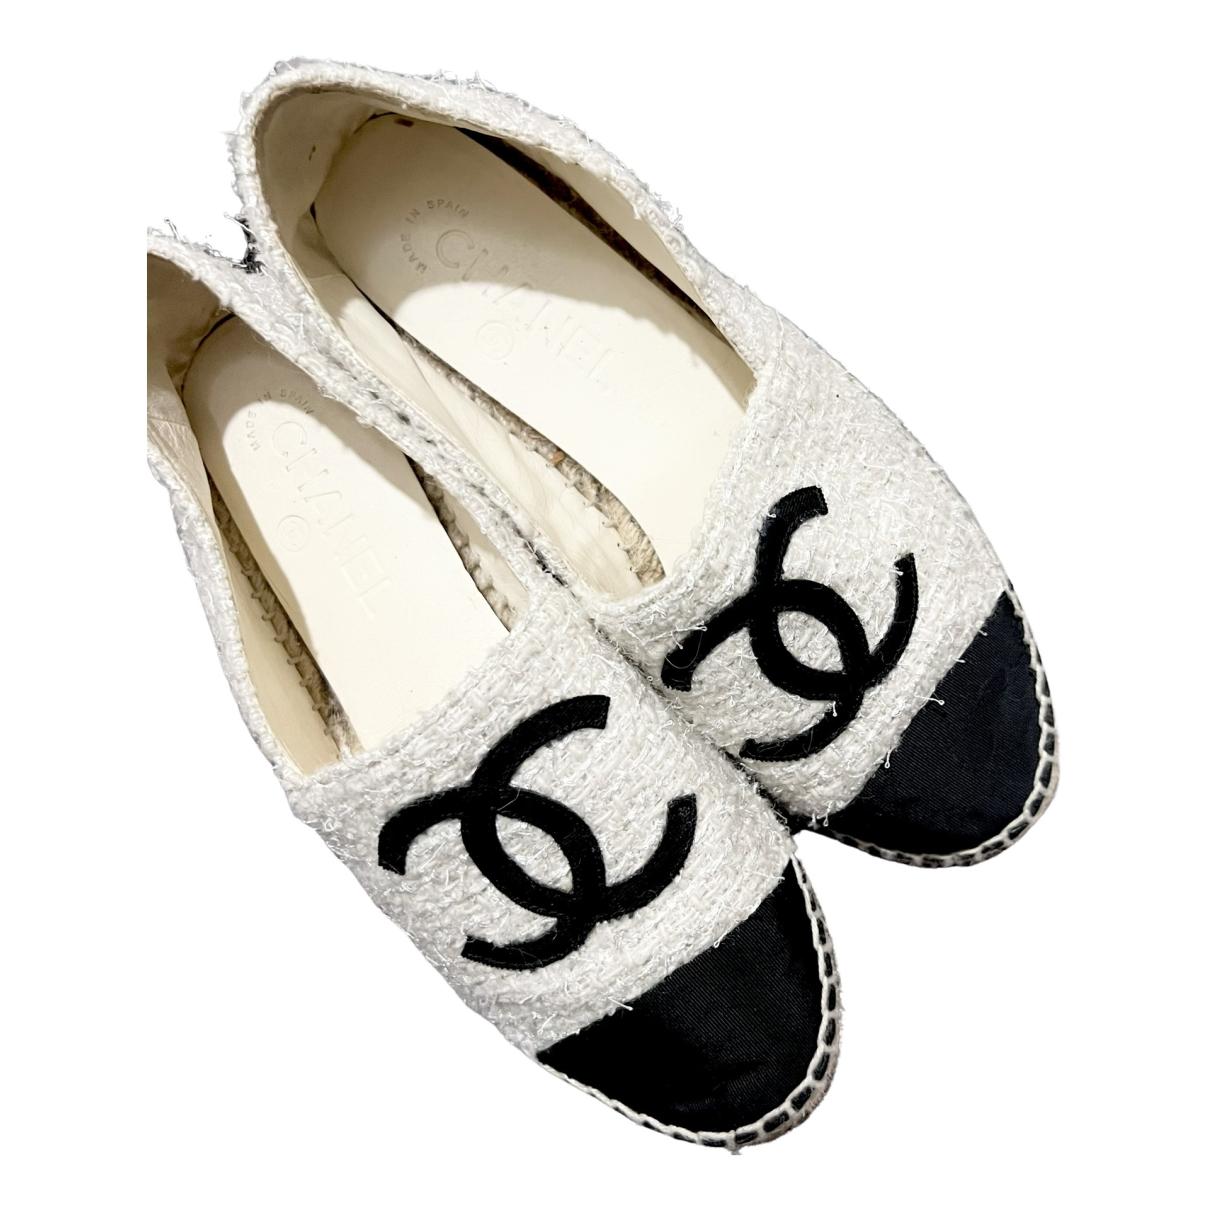 Chanel High-Top Espadrilles - Size 37